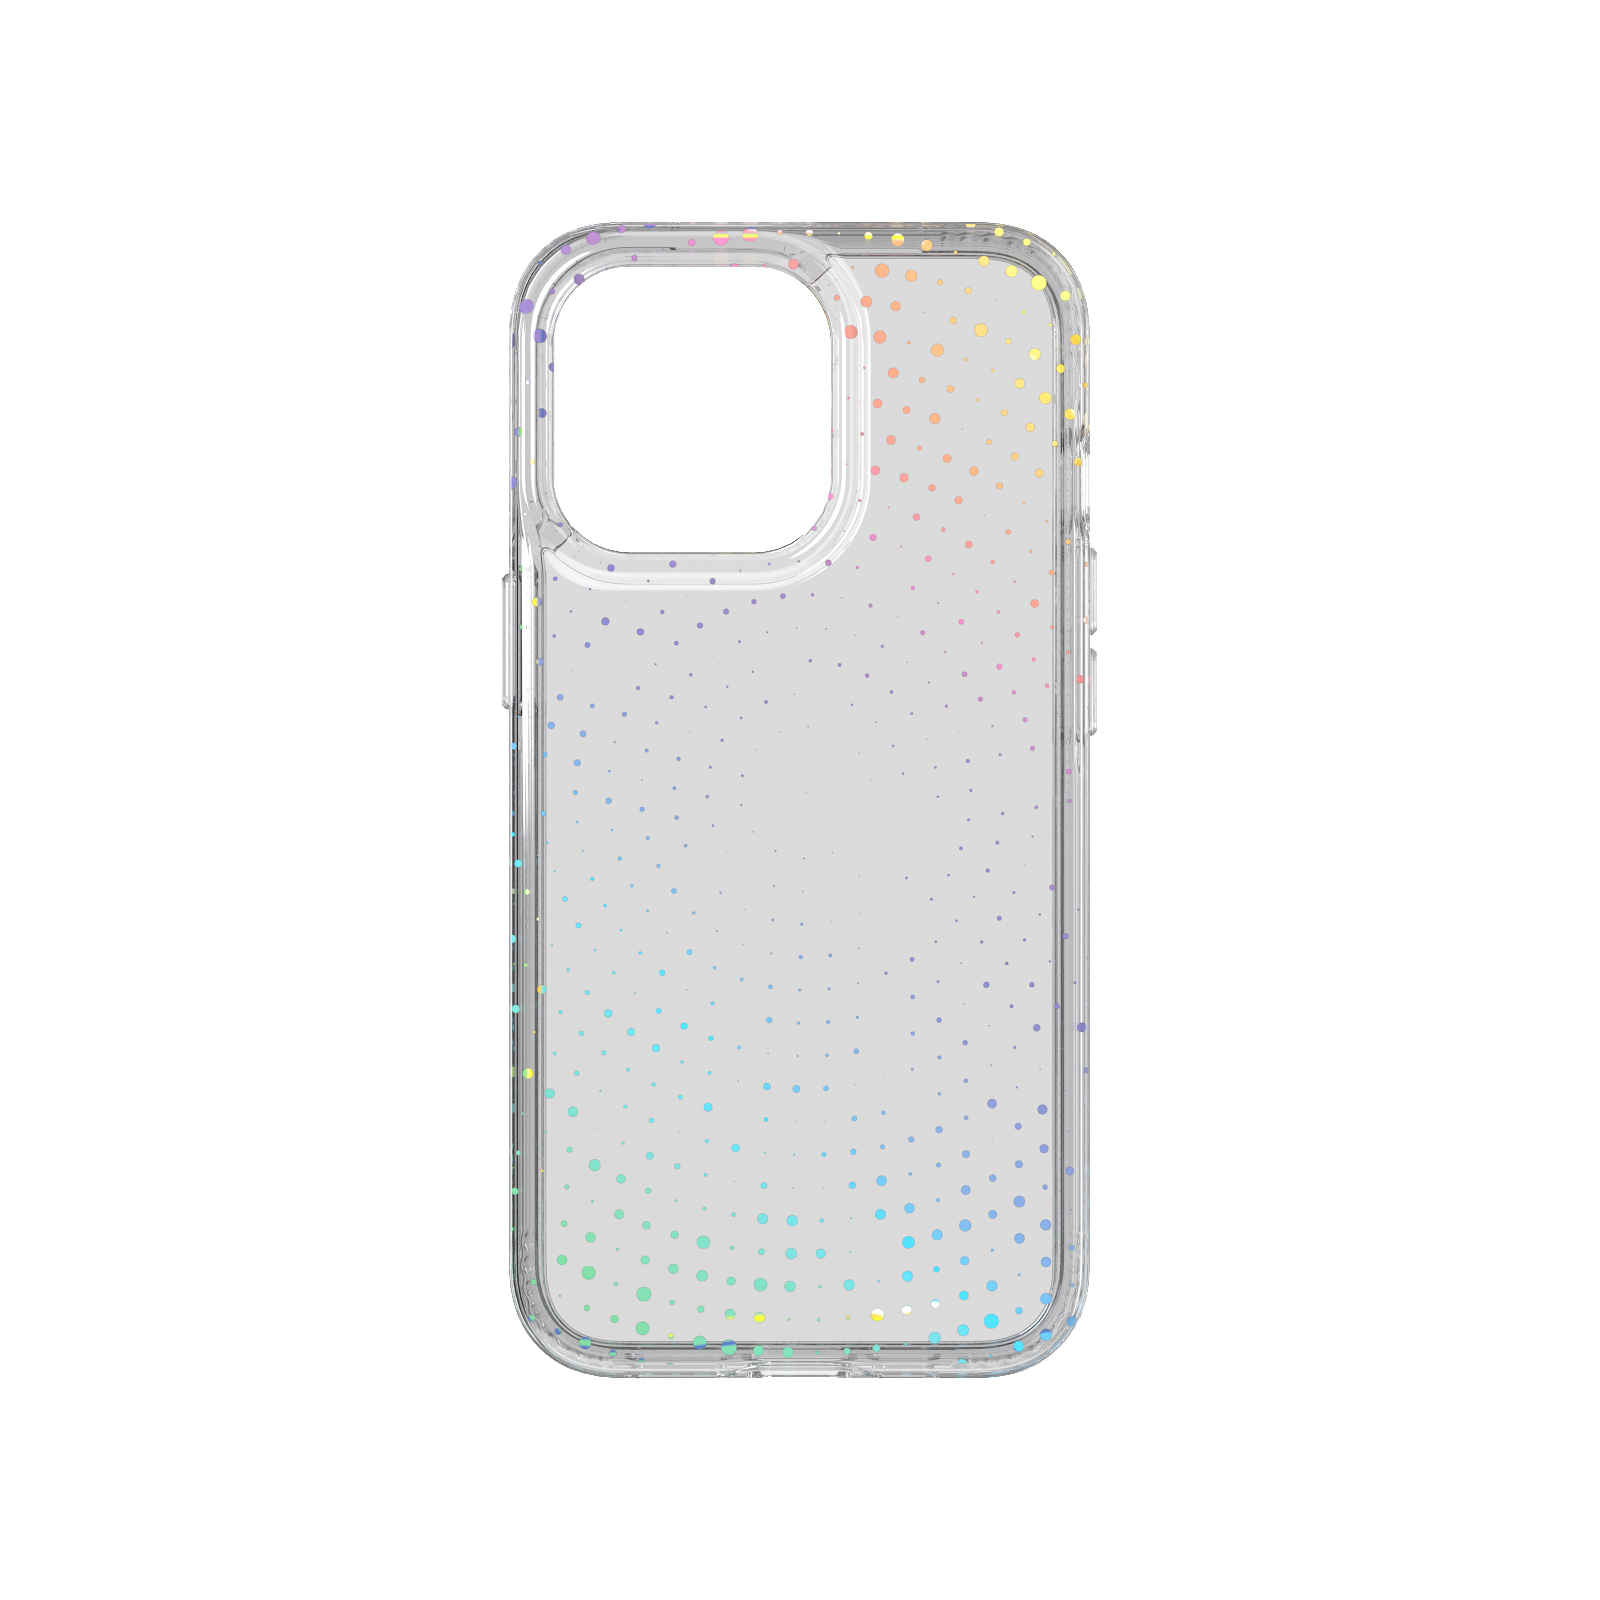 Tech21 Evo Sparkle for iPhone 13 Pro (Radiant)